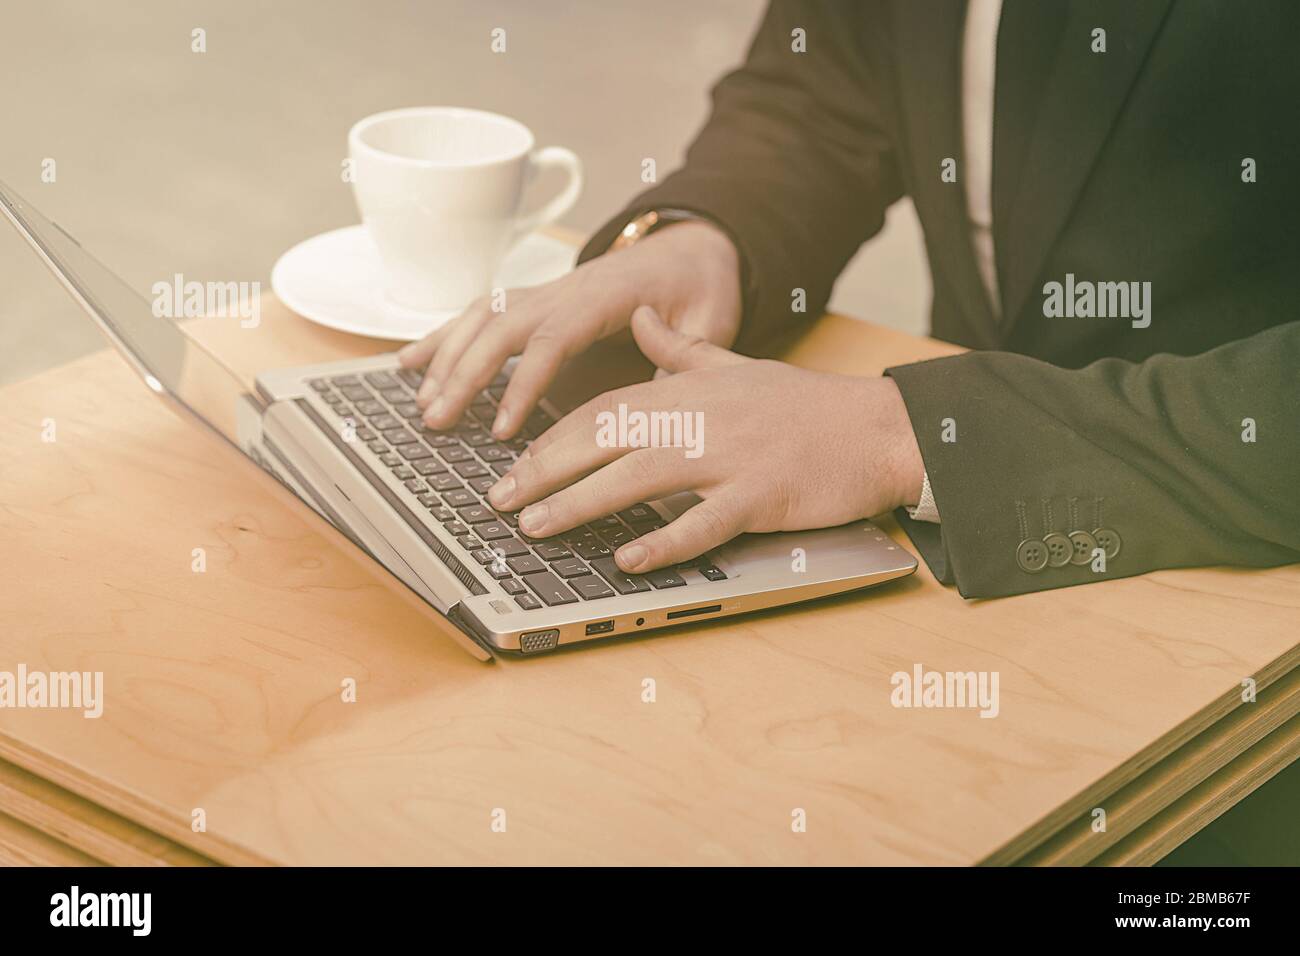 Businessman using laptop computer at street cafe outdoors. Close up shot of males hands typing at laptop keyboard. Business on the go concept. Toned Stock Photo